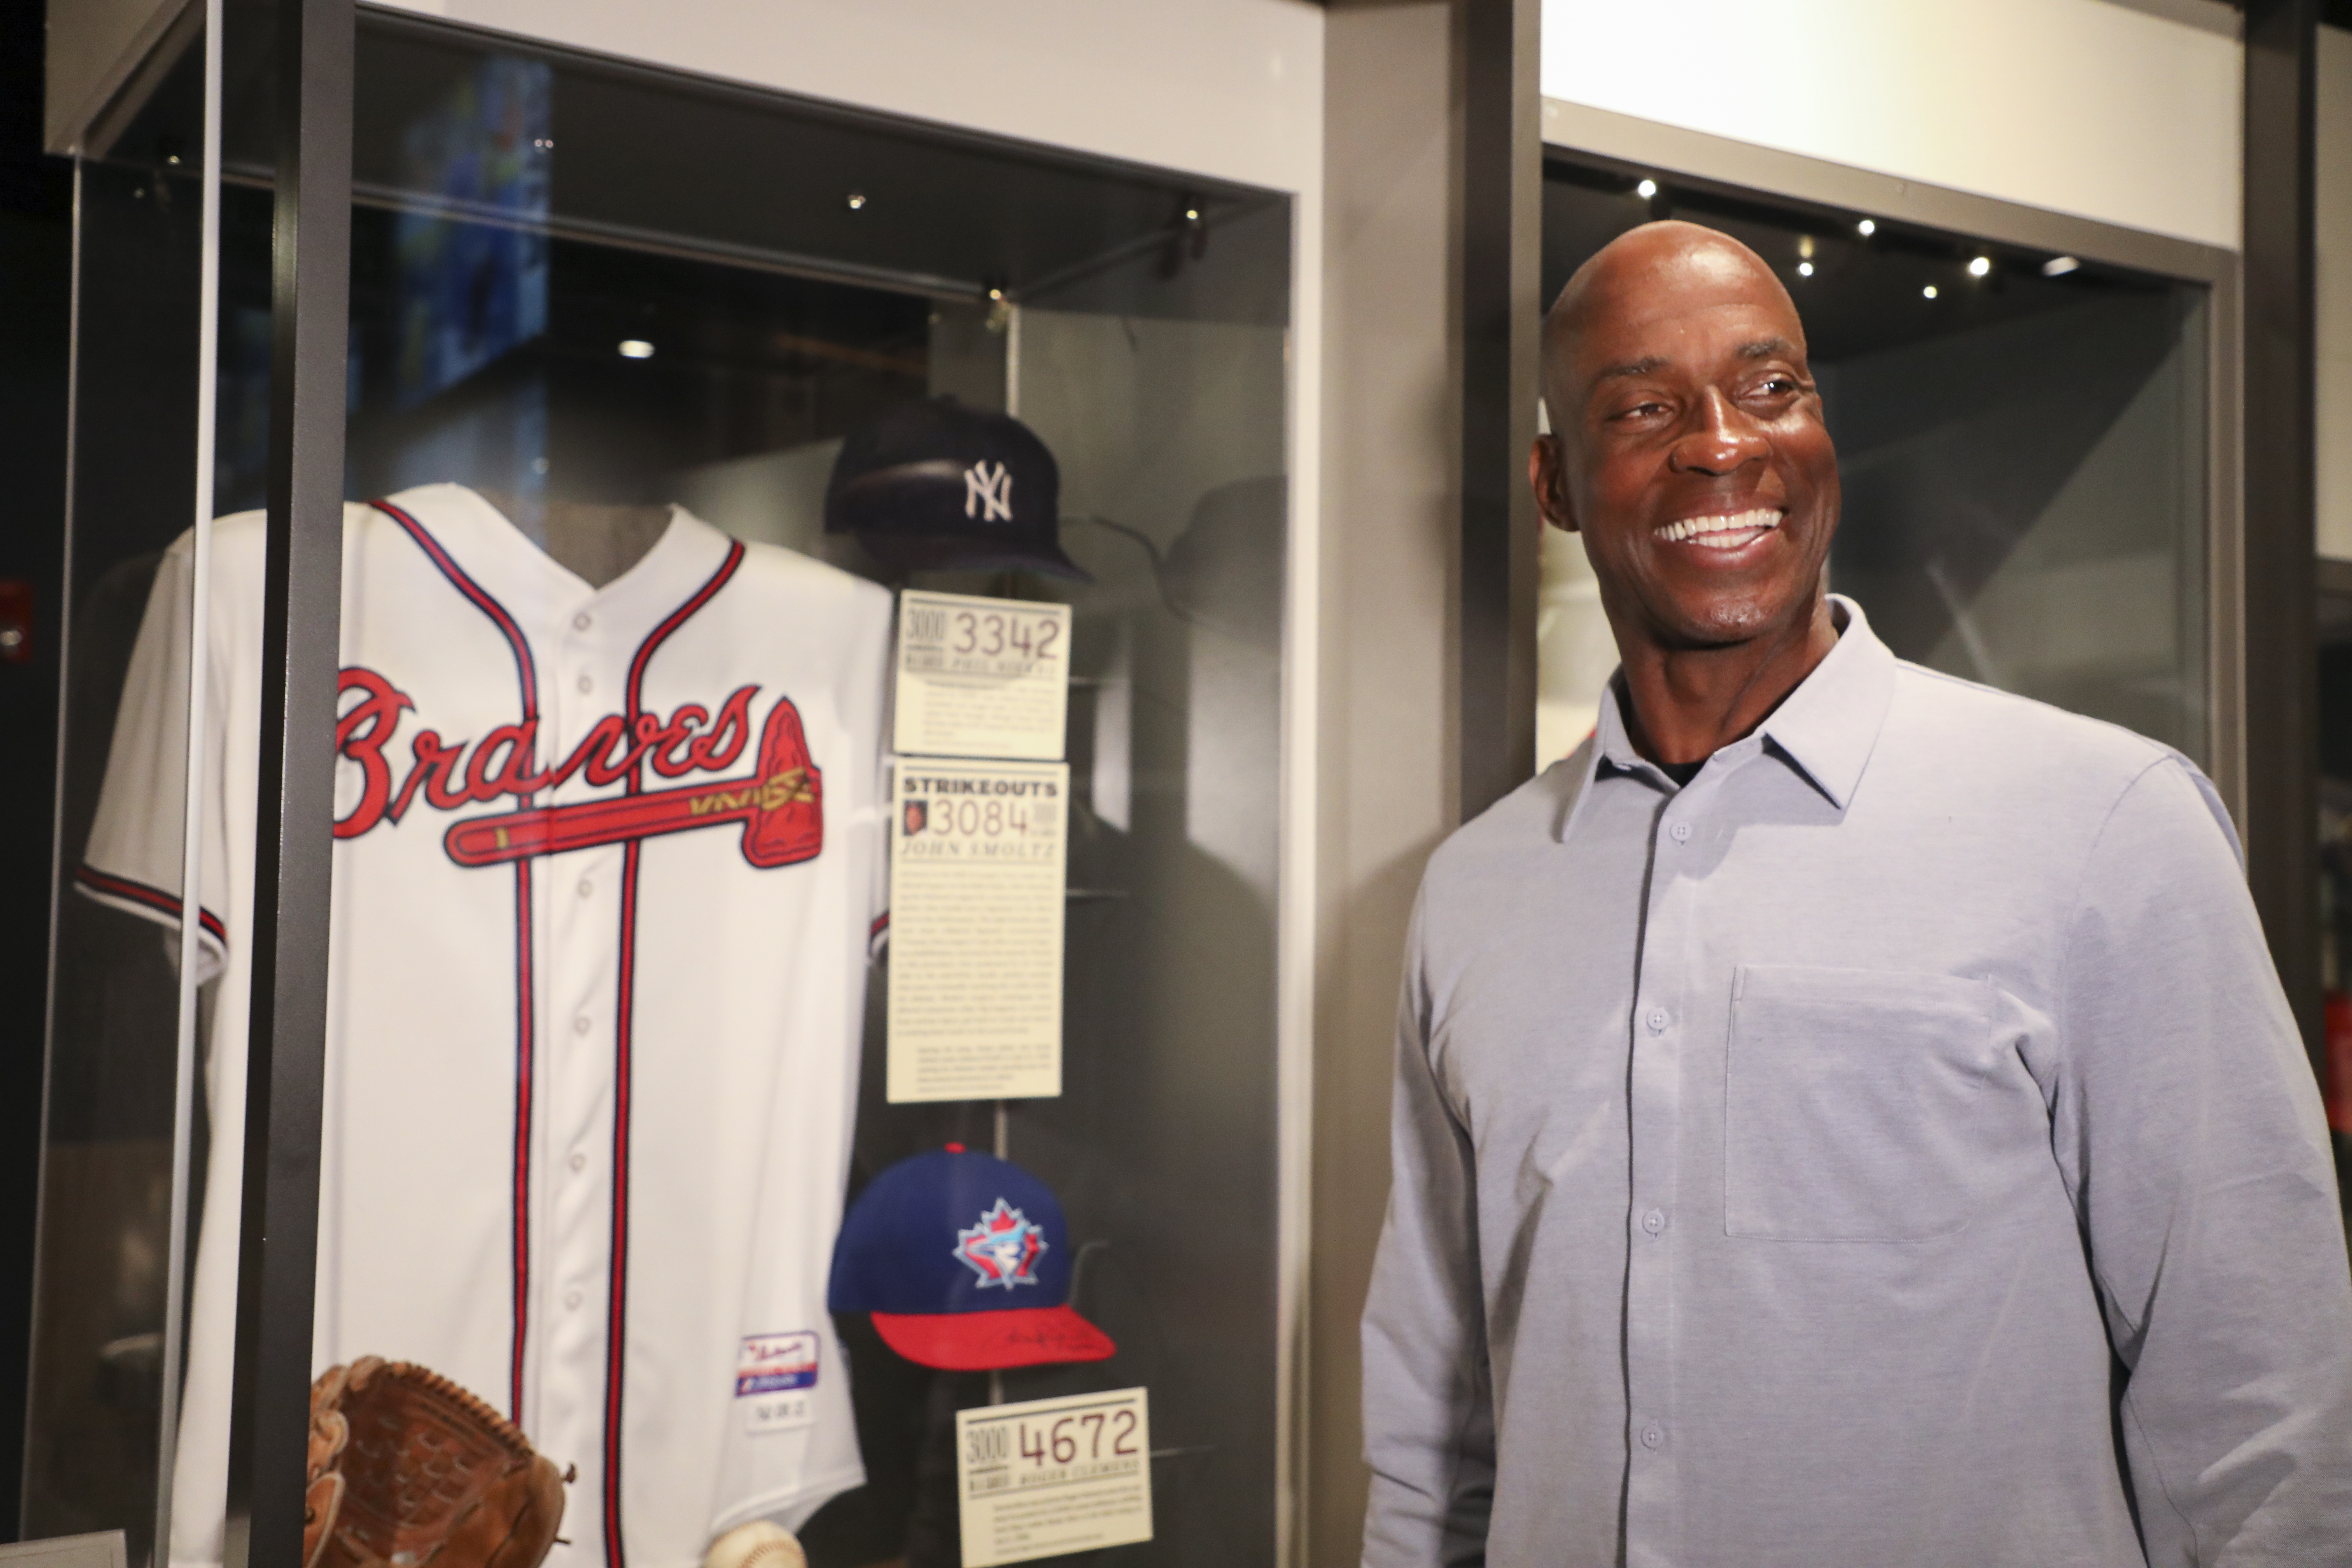 Florida Native Fred McGriff Elected to Baseball Hall of Fame - ITG Next